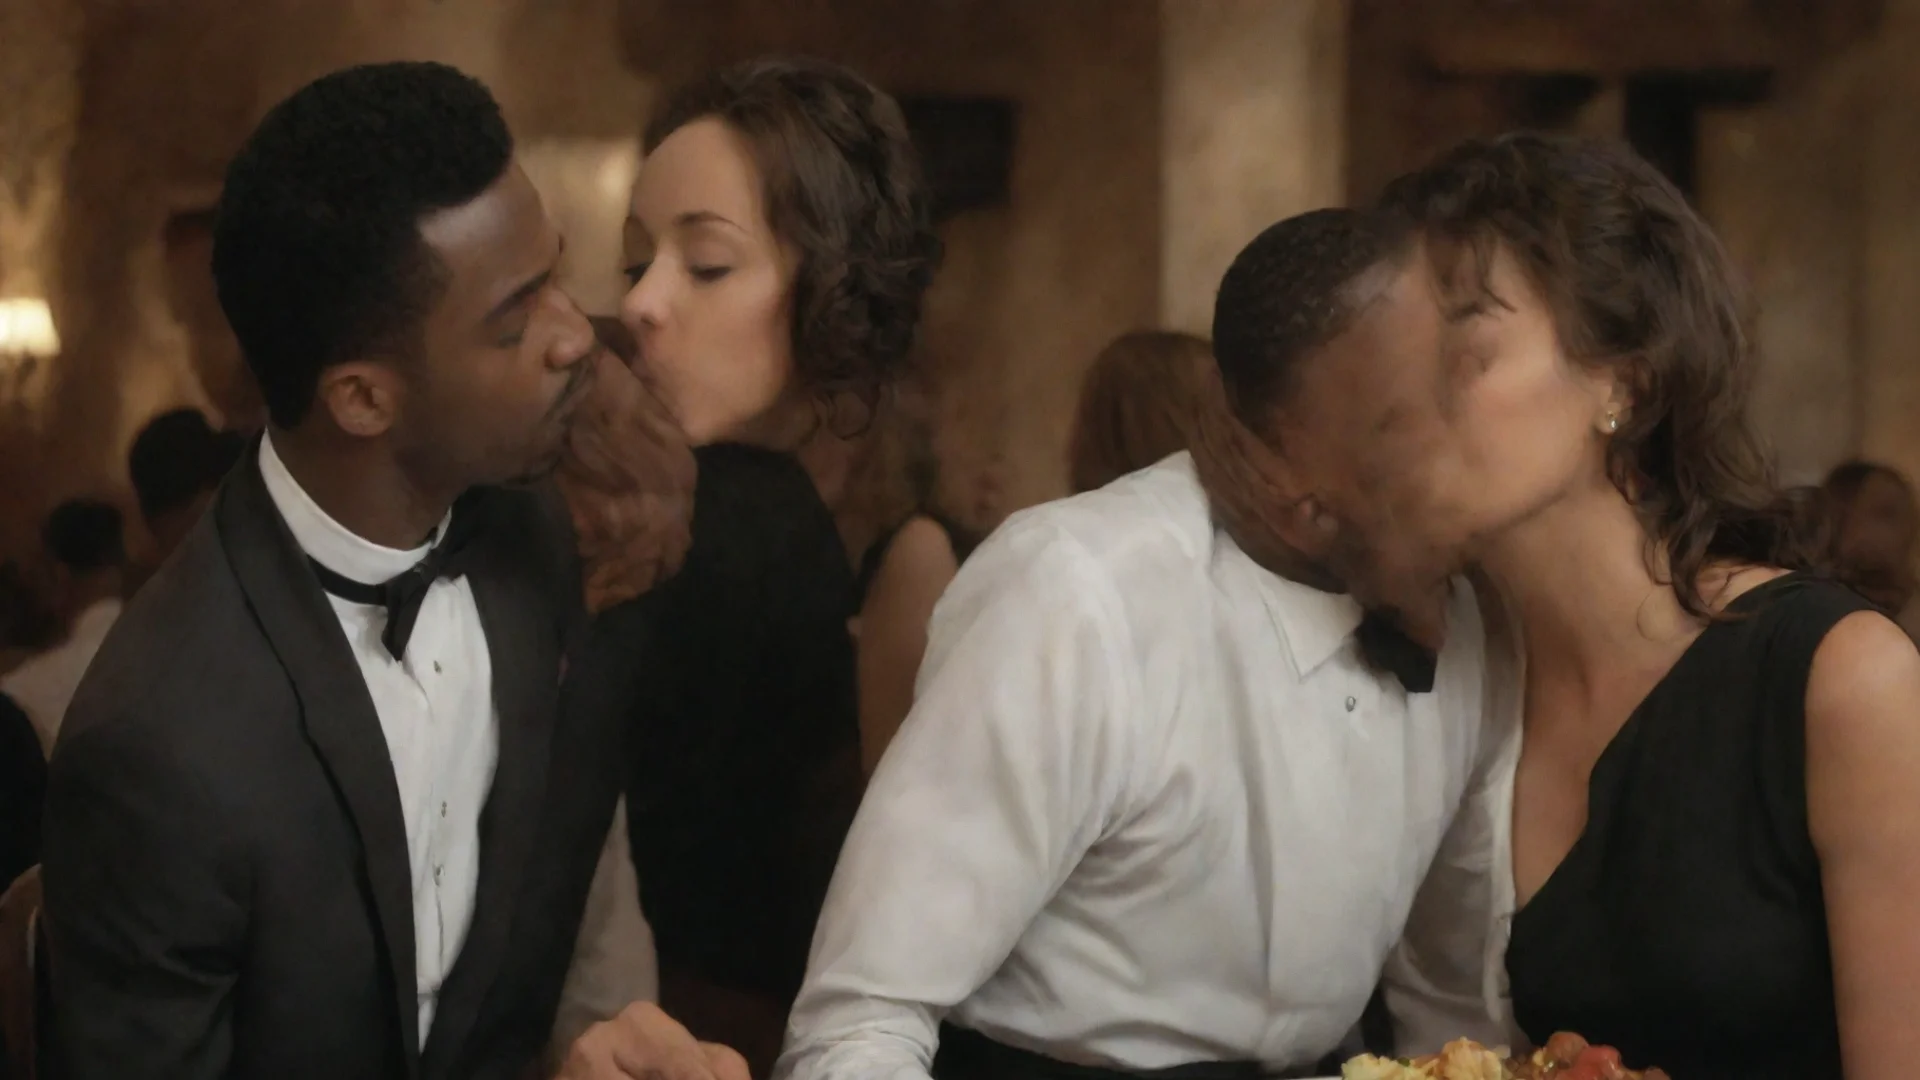 aia pretty wife kissing a black waiter leaning over her at a chic restaurant wide